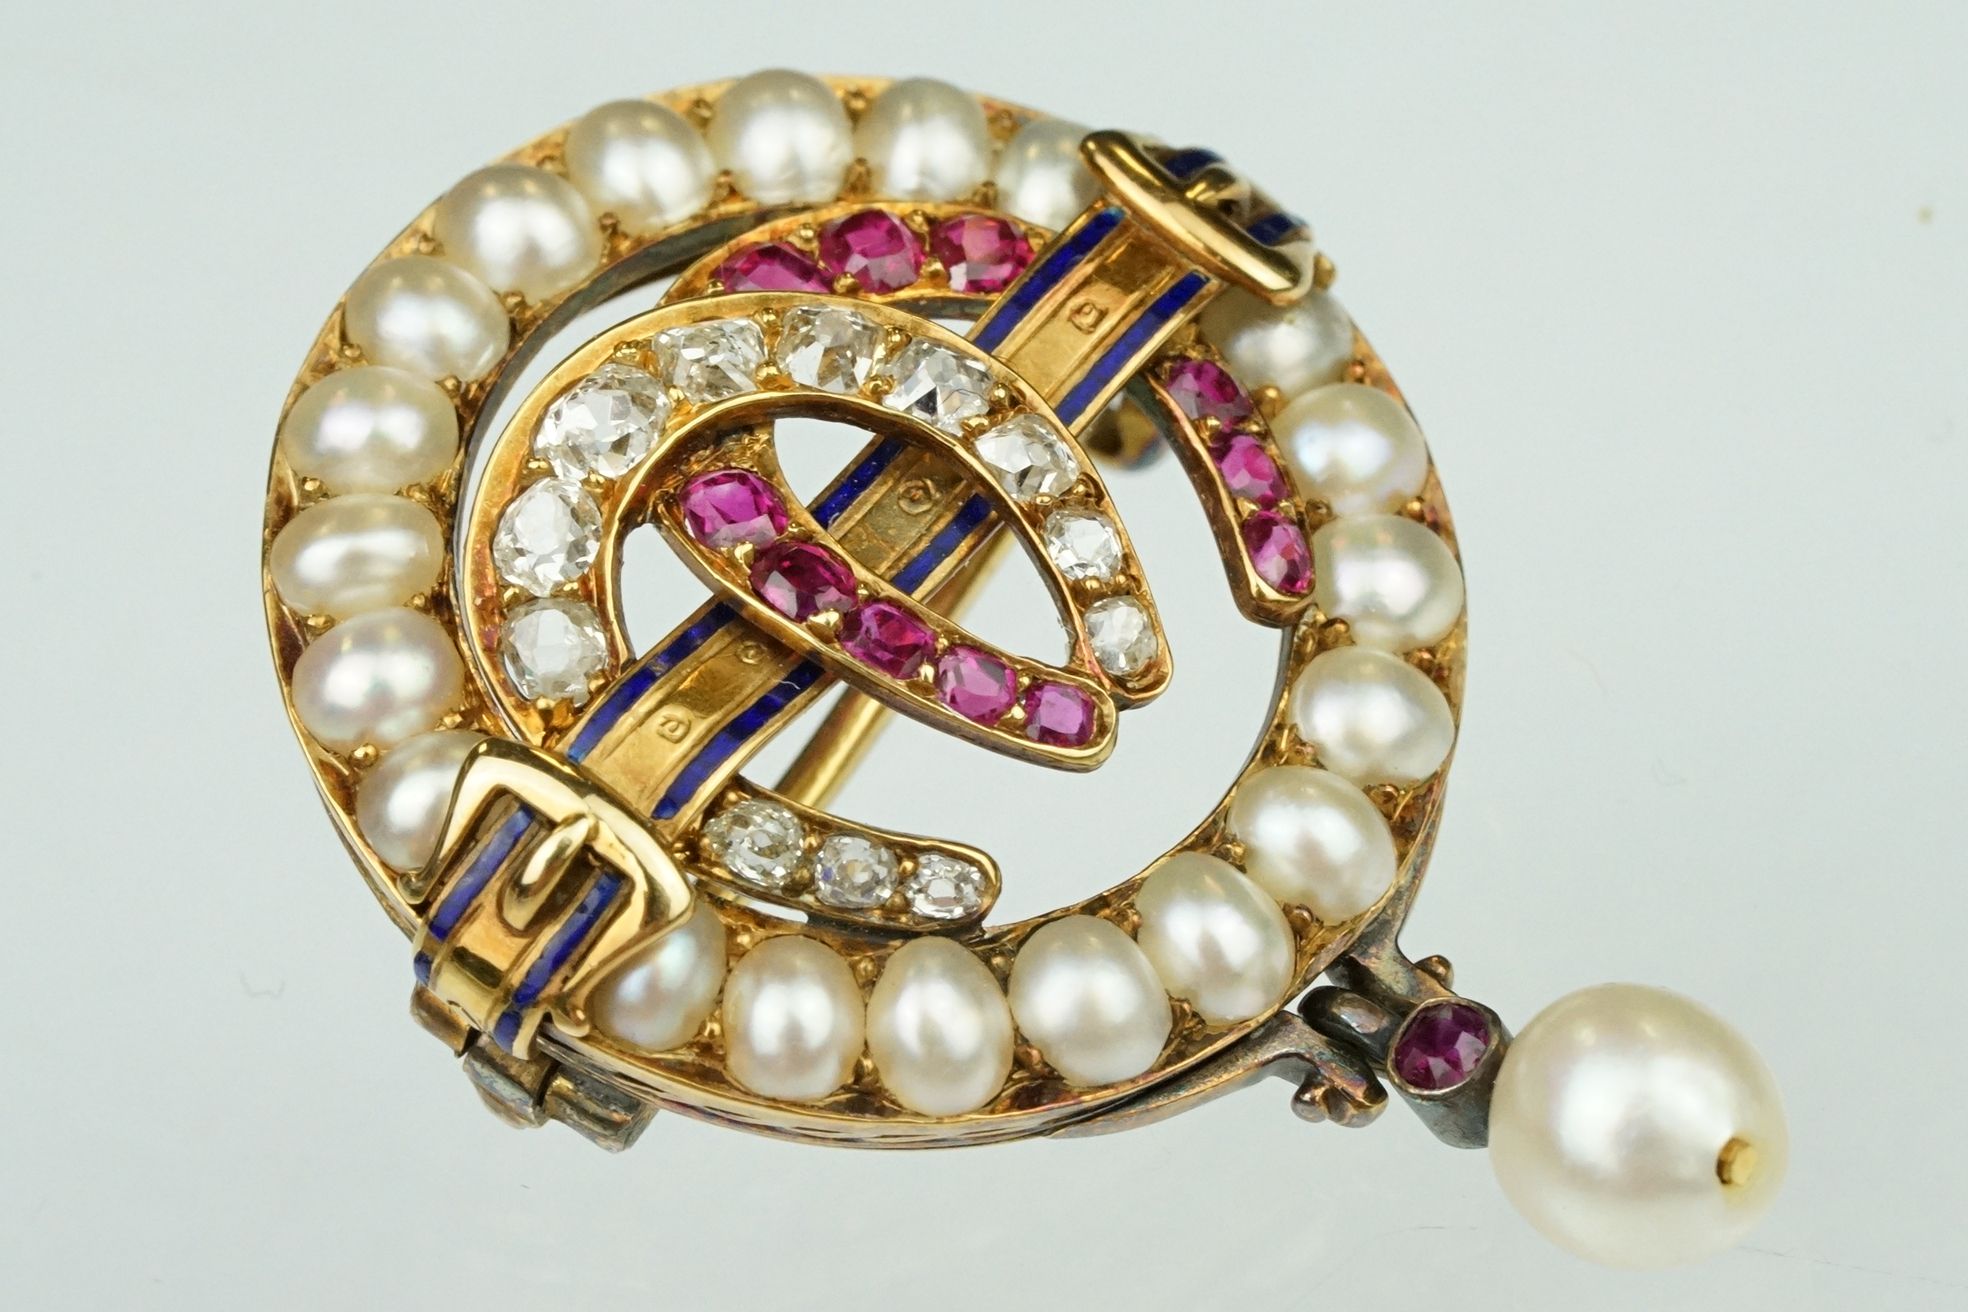 19th century ruby, diamond and pearl brooch, the two central entwined horse shoe motifs set with